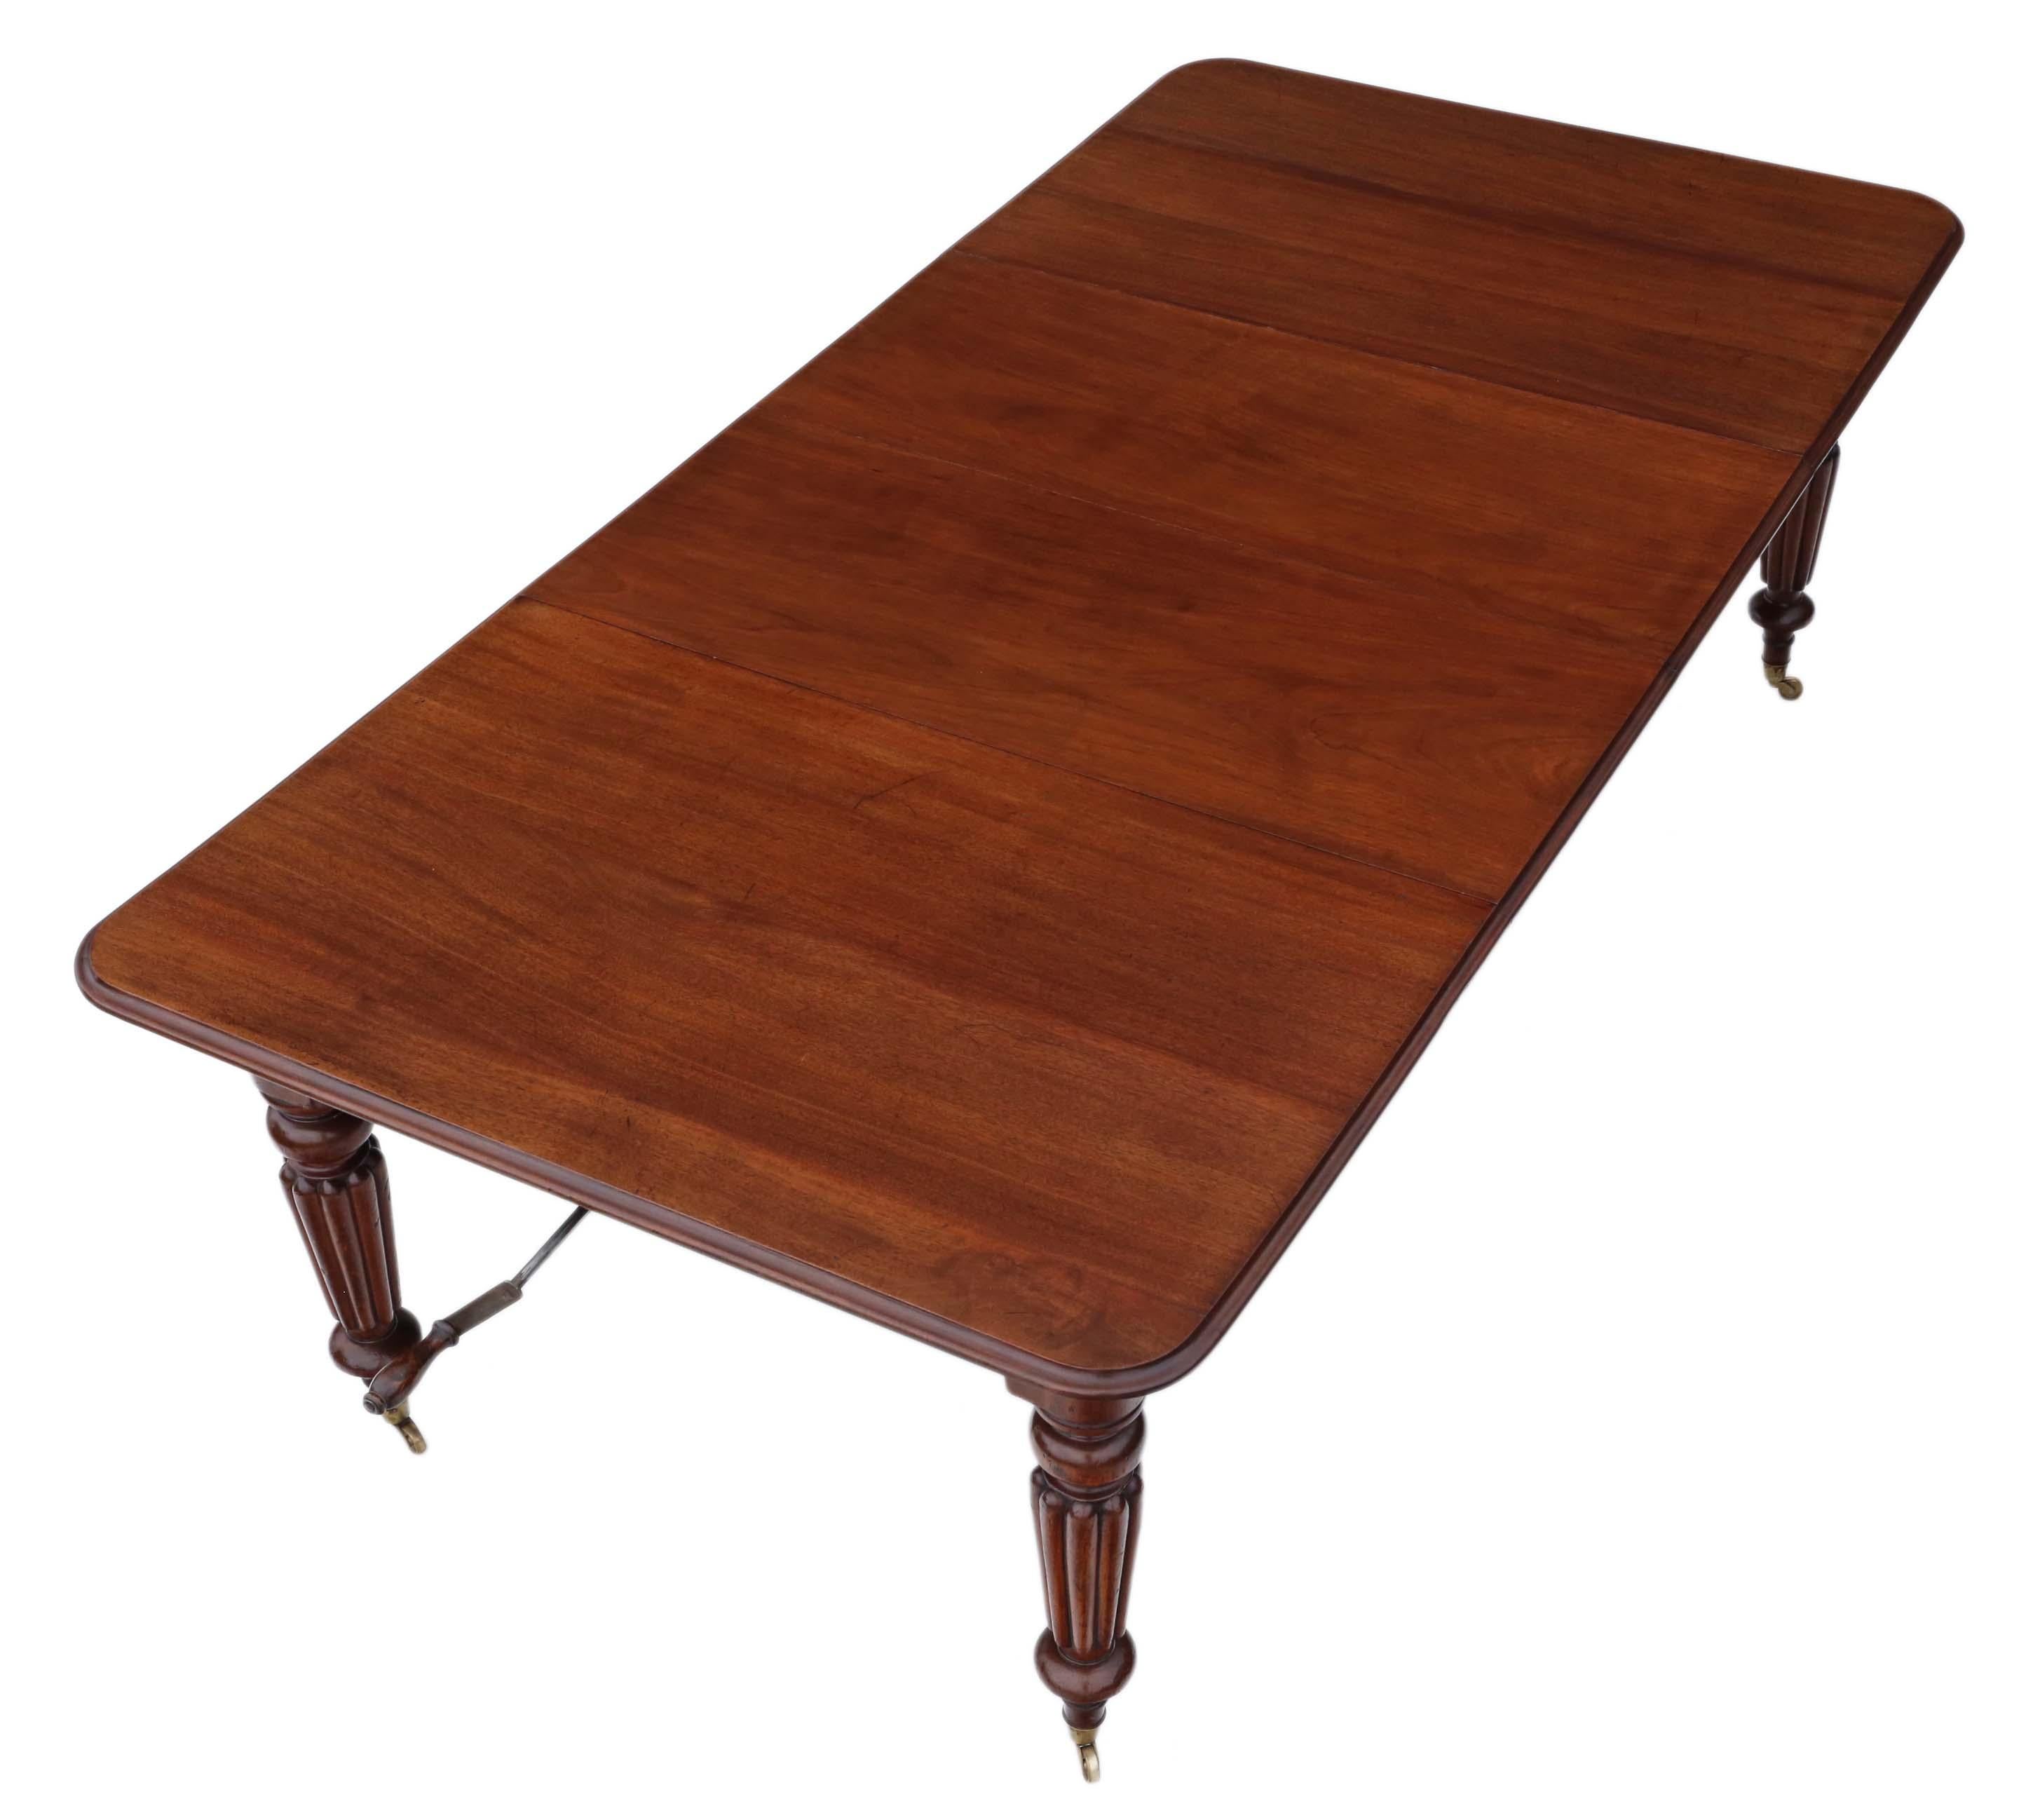 2 leaf Victorian windout extending dining table approximately 8' x 4' (see exact dimensions below) when extended.
A lovely table dating from circa 1830-50.
This is a quality (better than most) table, that is full of age, charm and character.
Rare